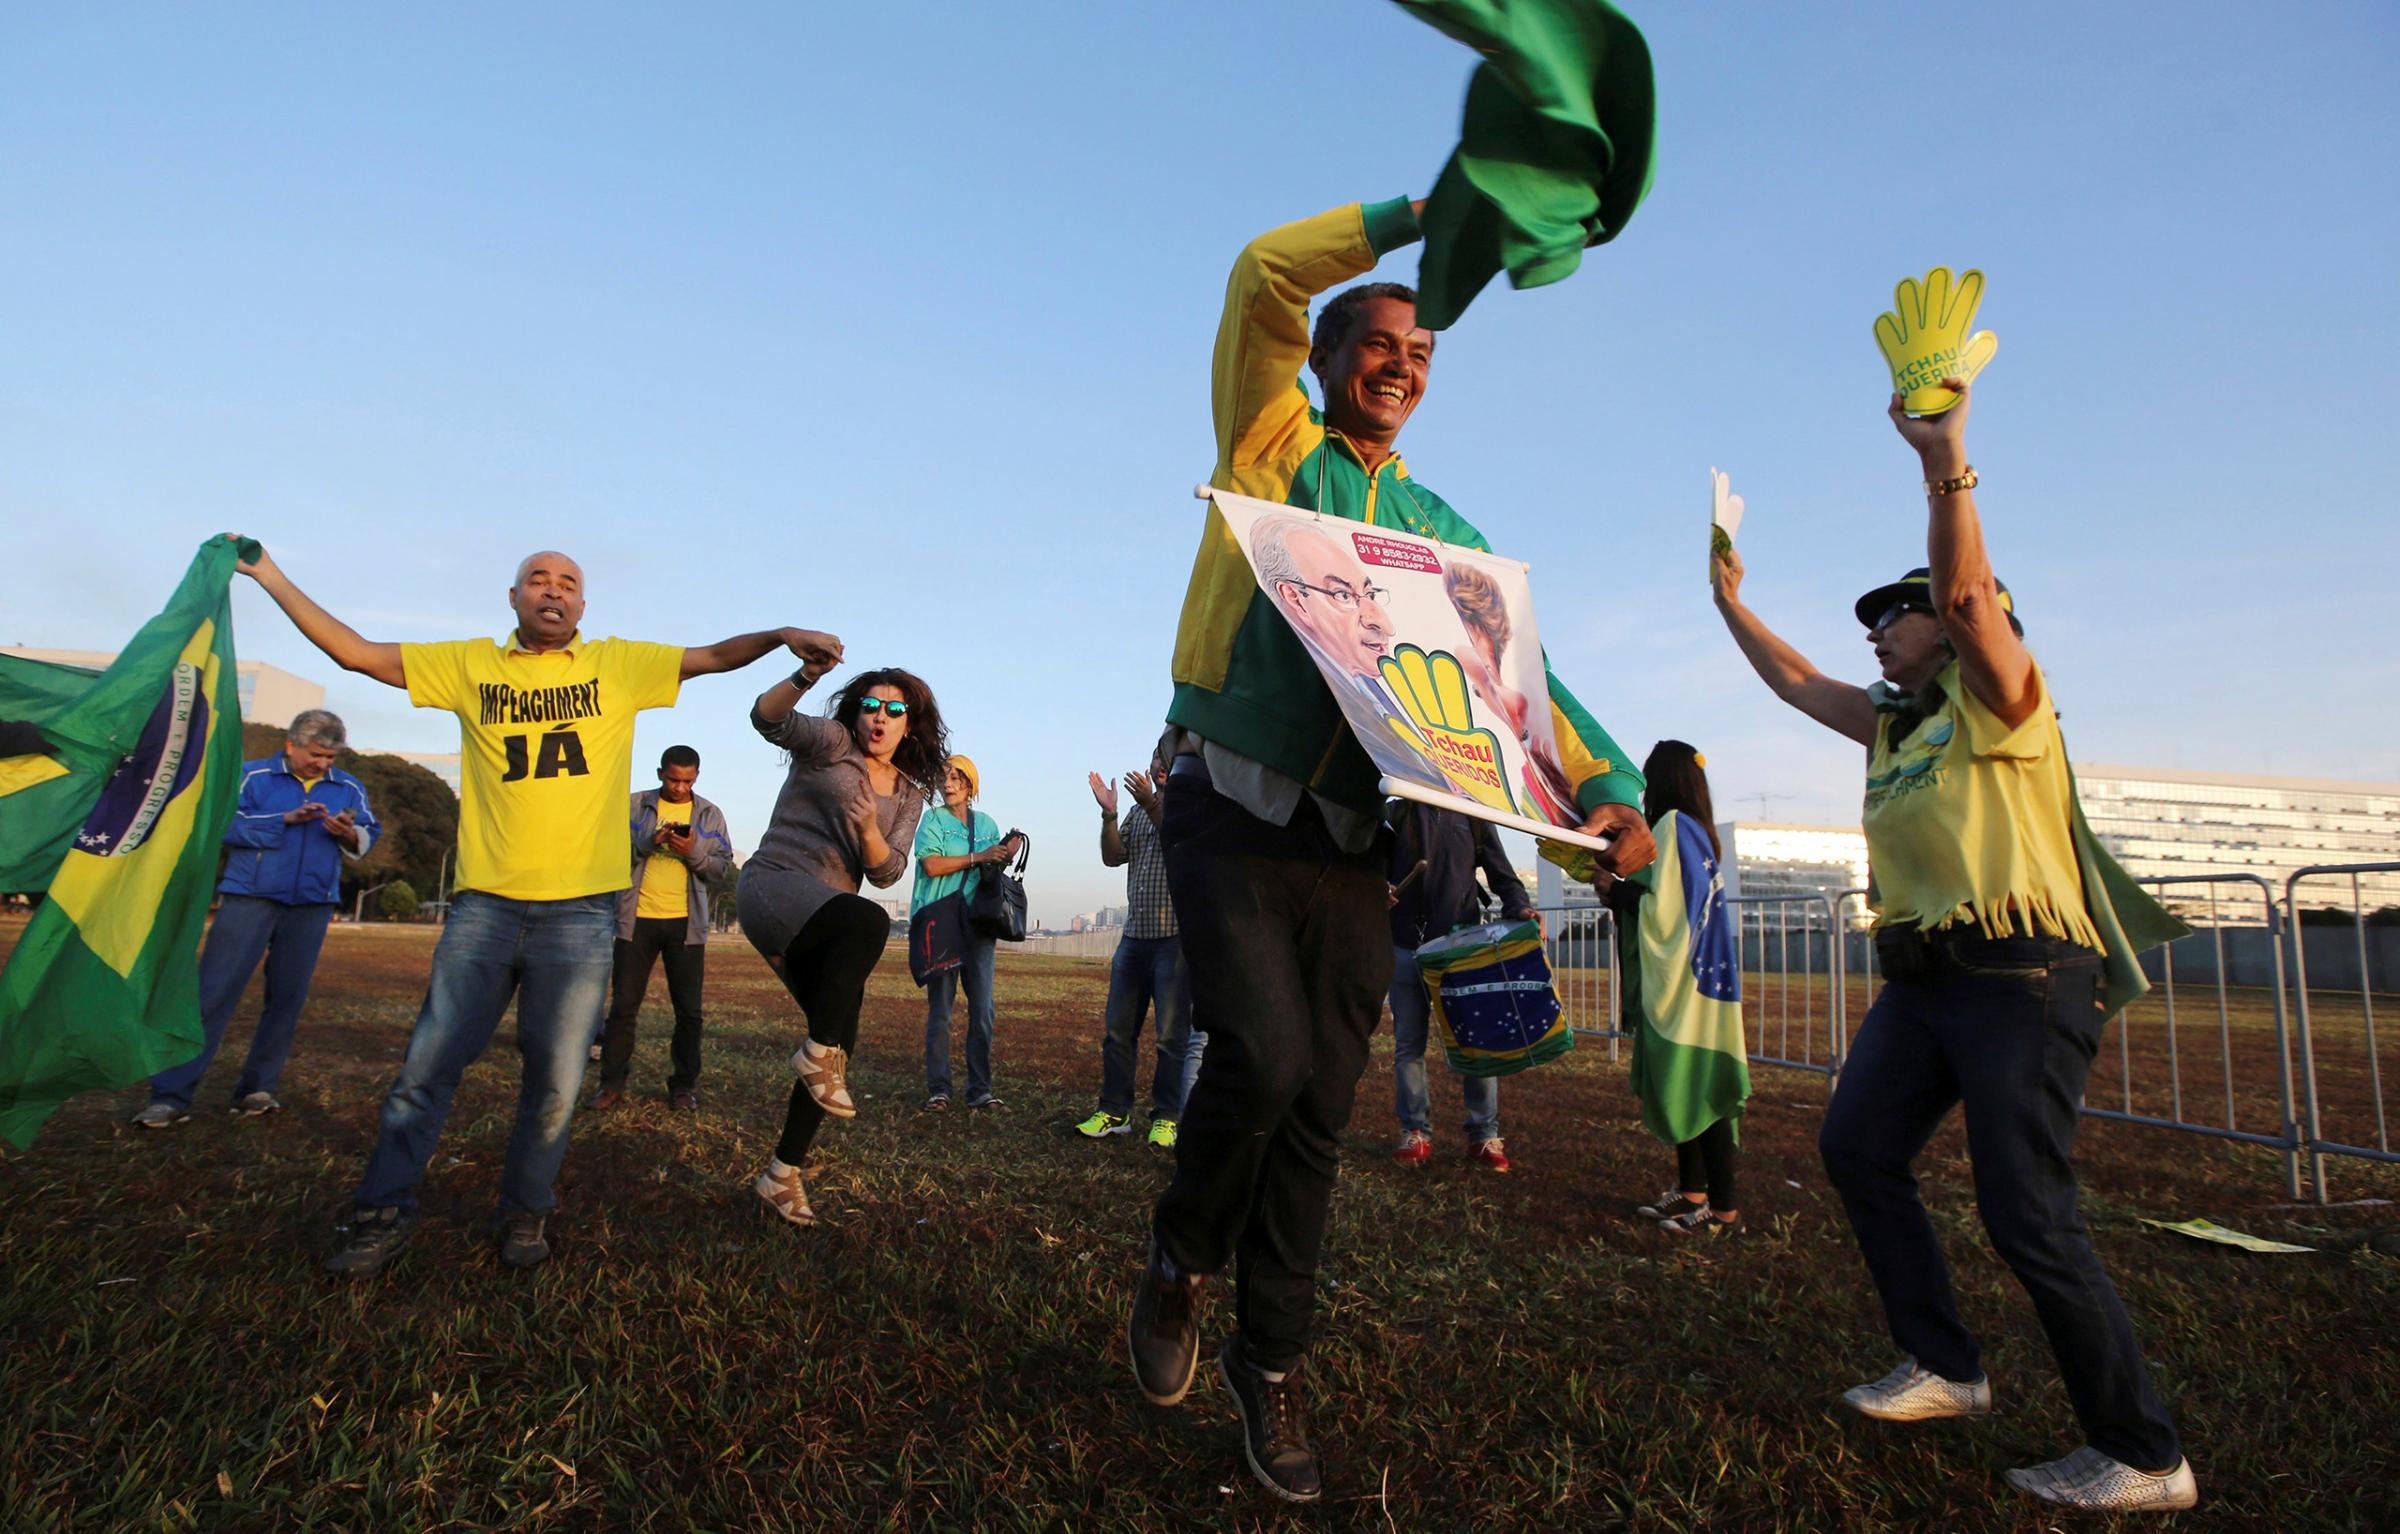 Demonstrators who support Brazil's President Dilma Rousseff's impeachment react in Brasilia, Brazil, May 12, 2016.